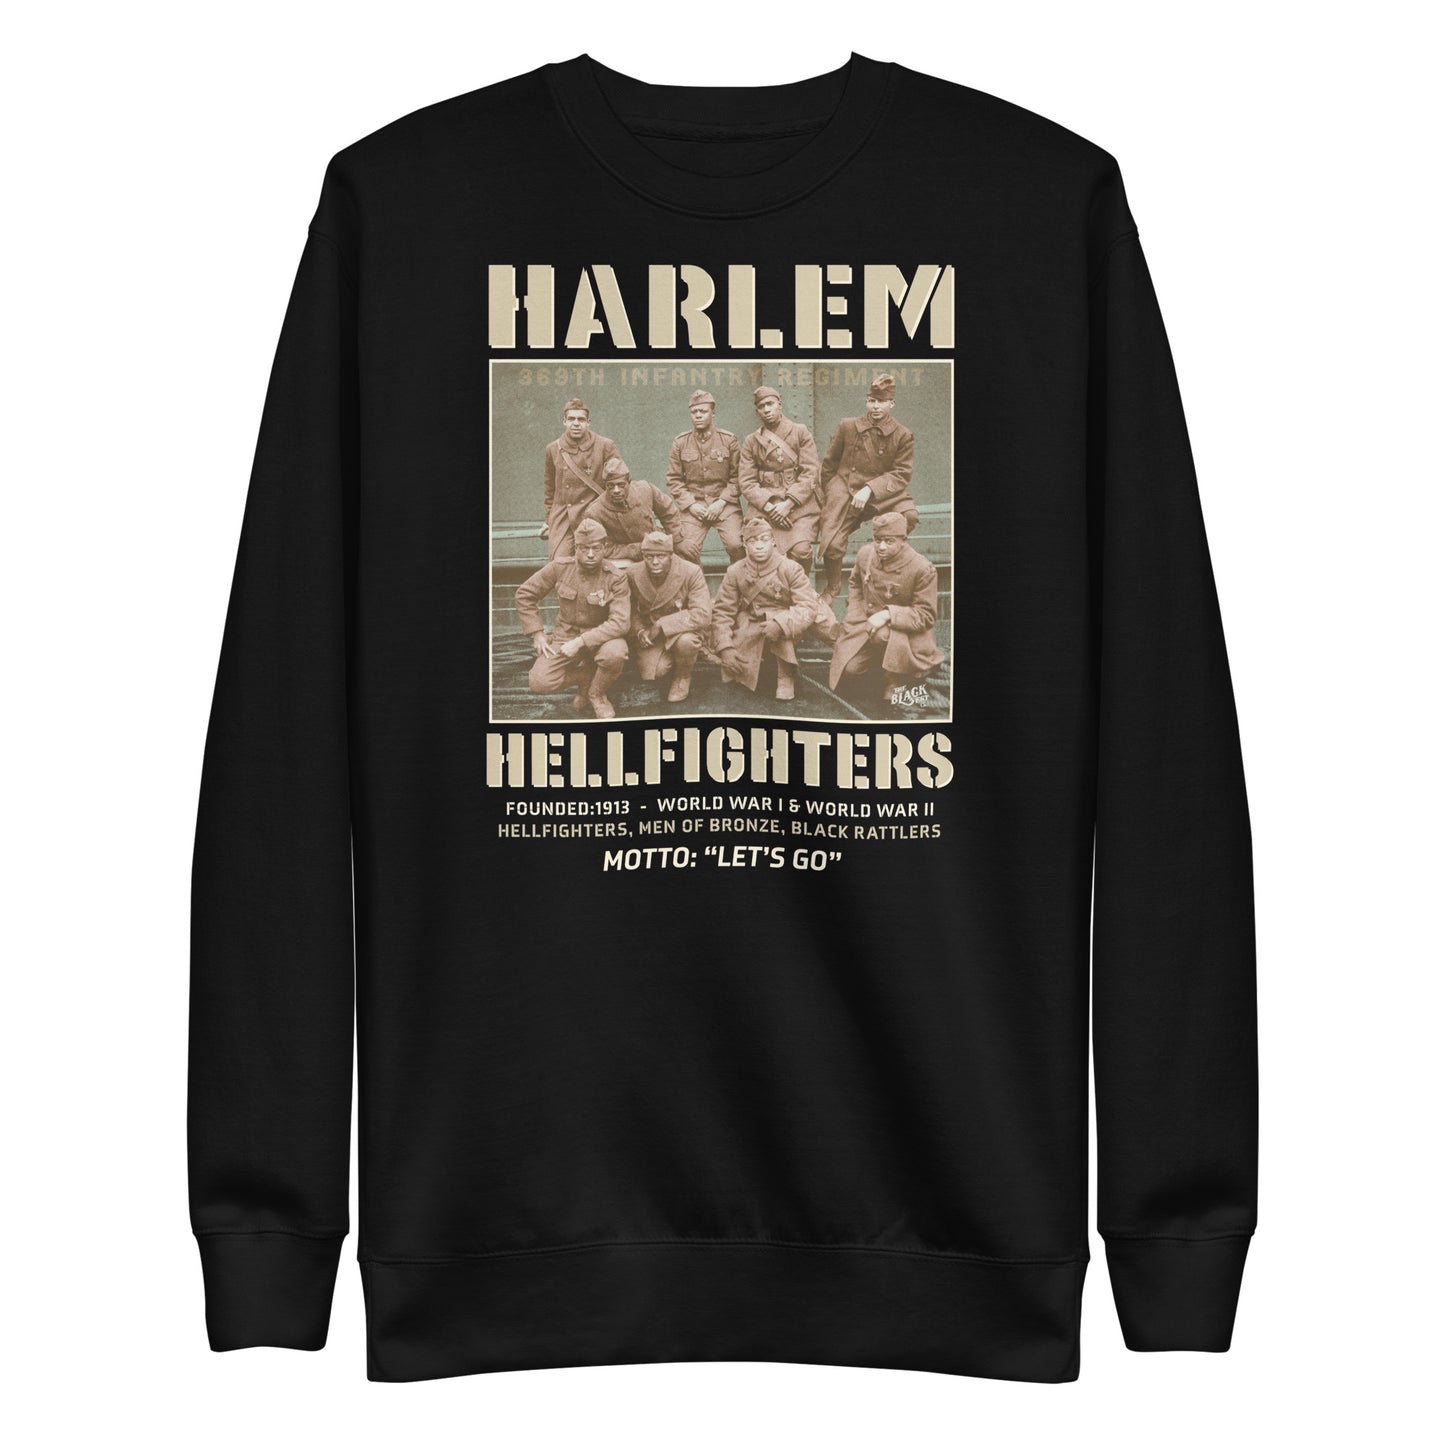 black premium sweatshirt with a vintage image of wwi soldiers with text that reads harlem hellfighters